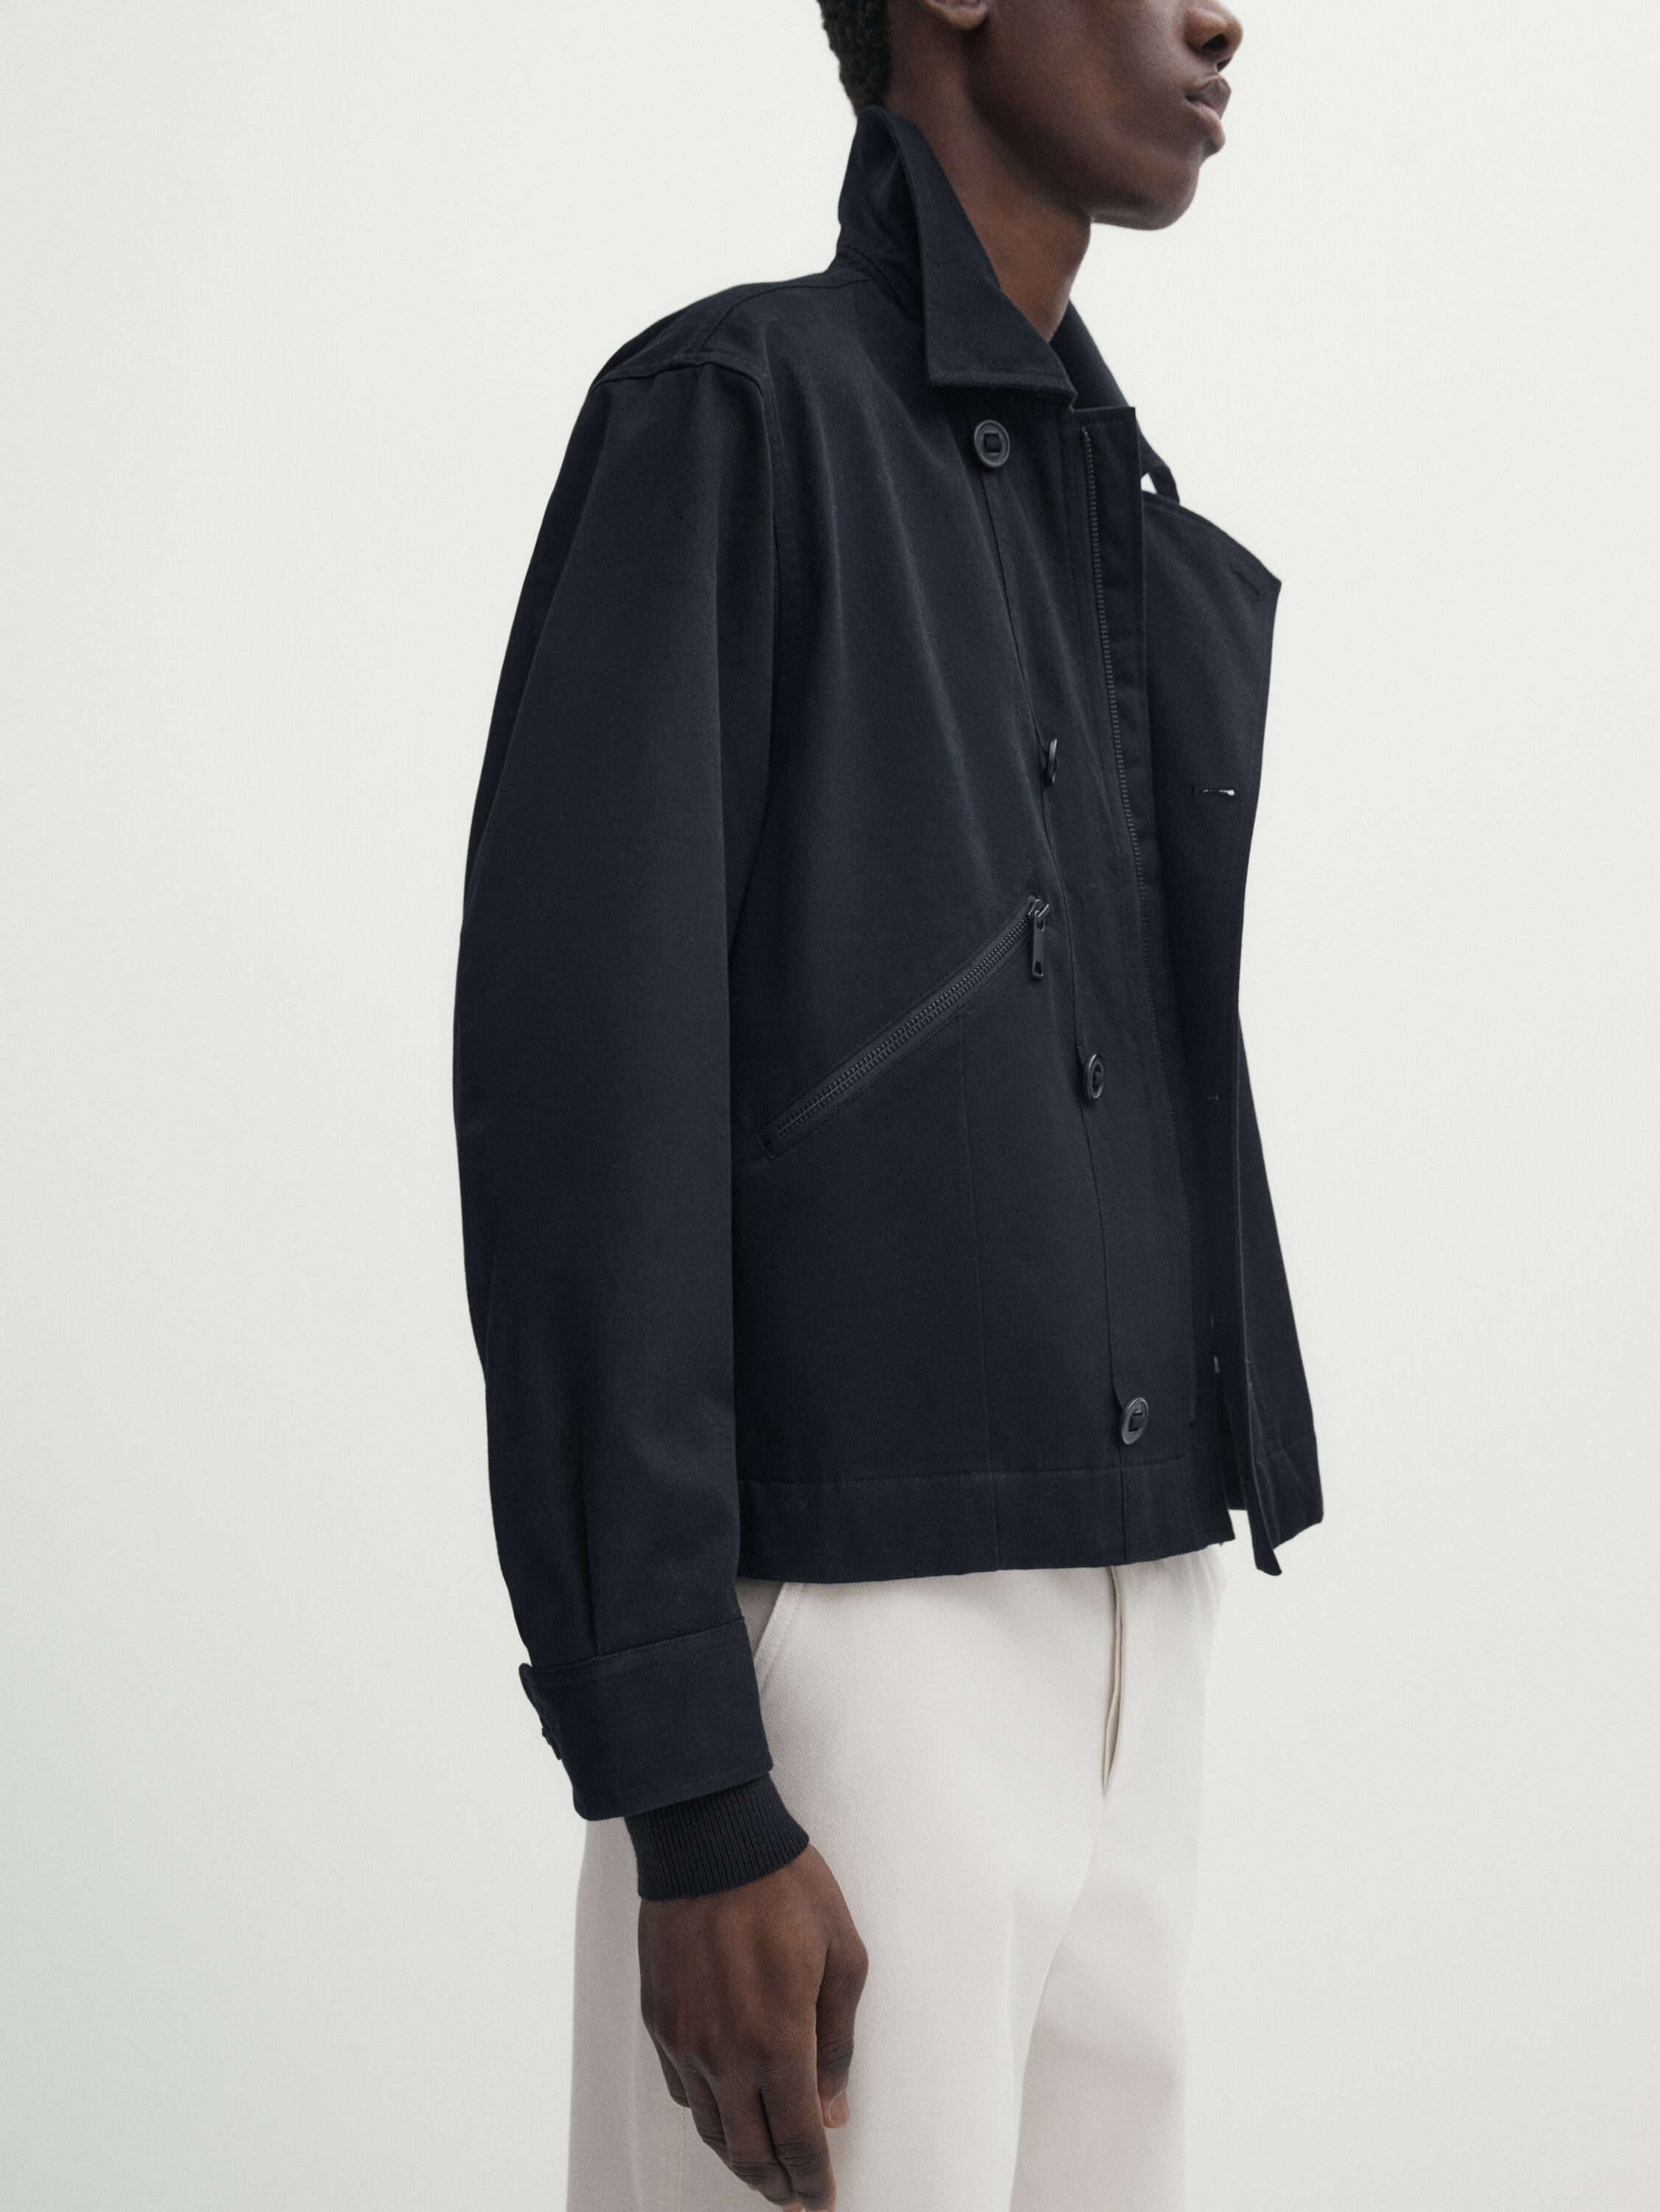 Double-breasted jacket with zip pockets - Studio